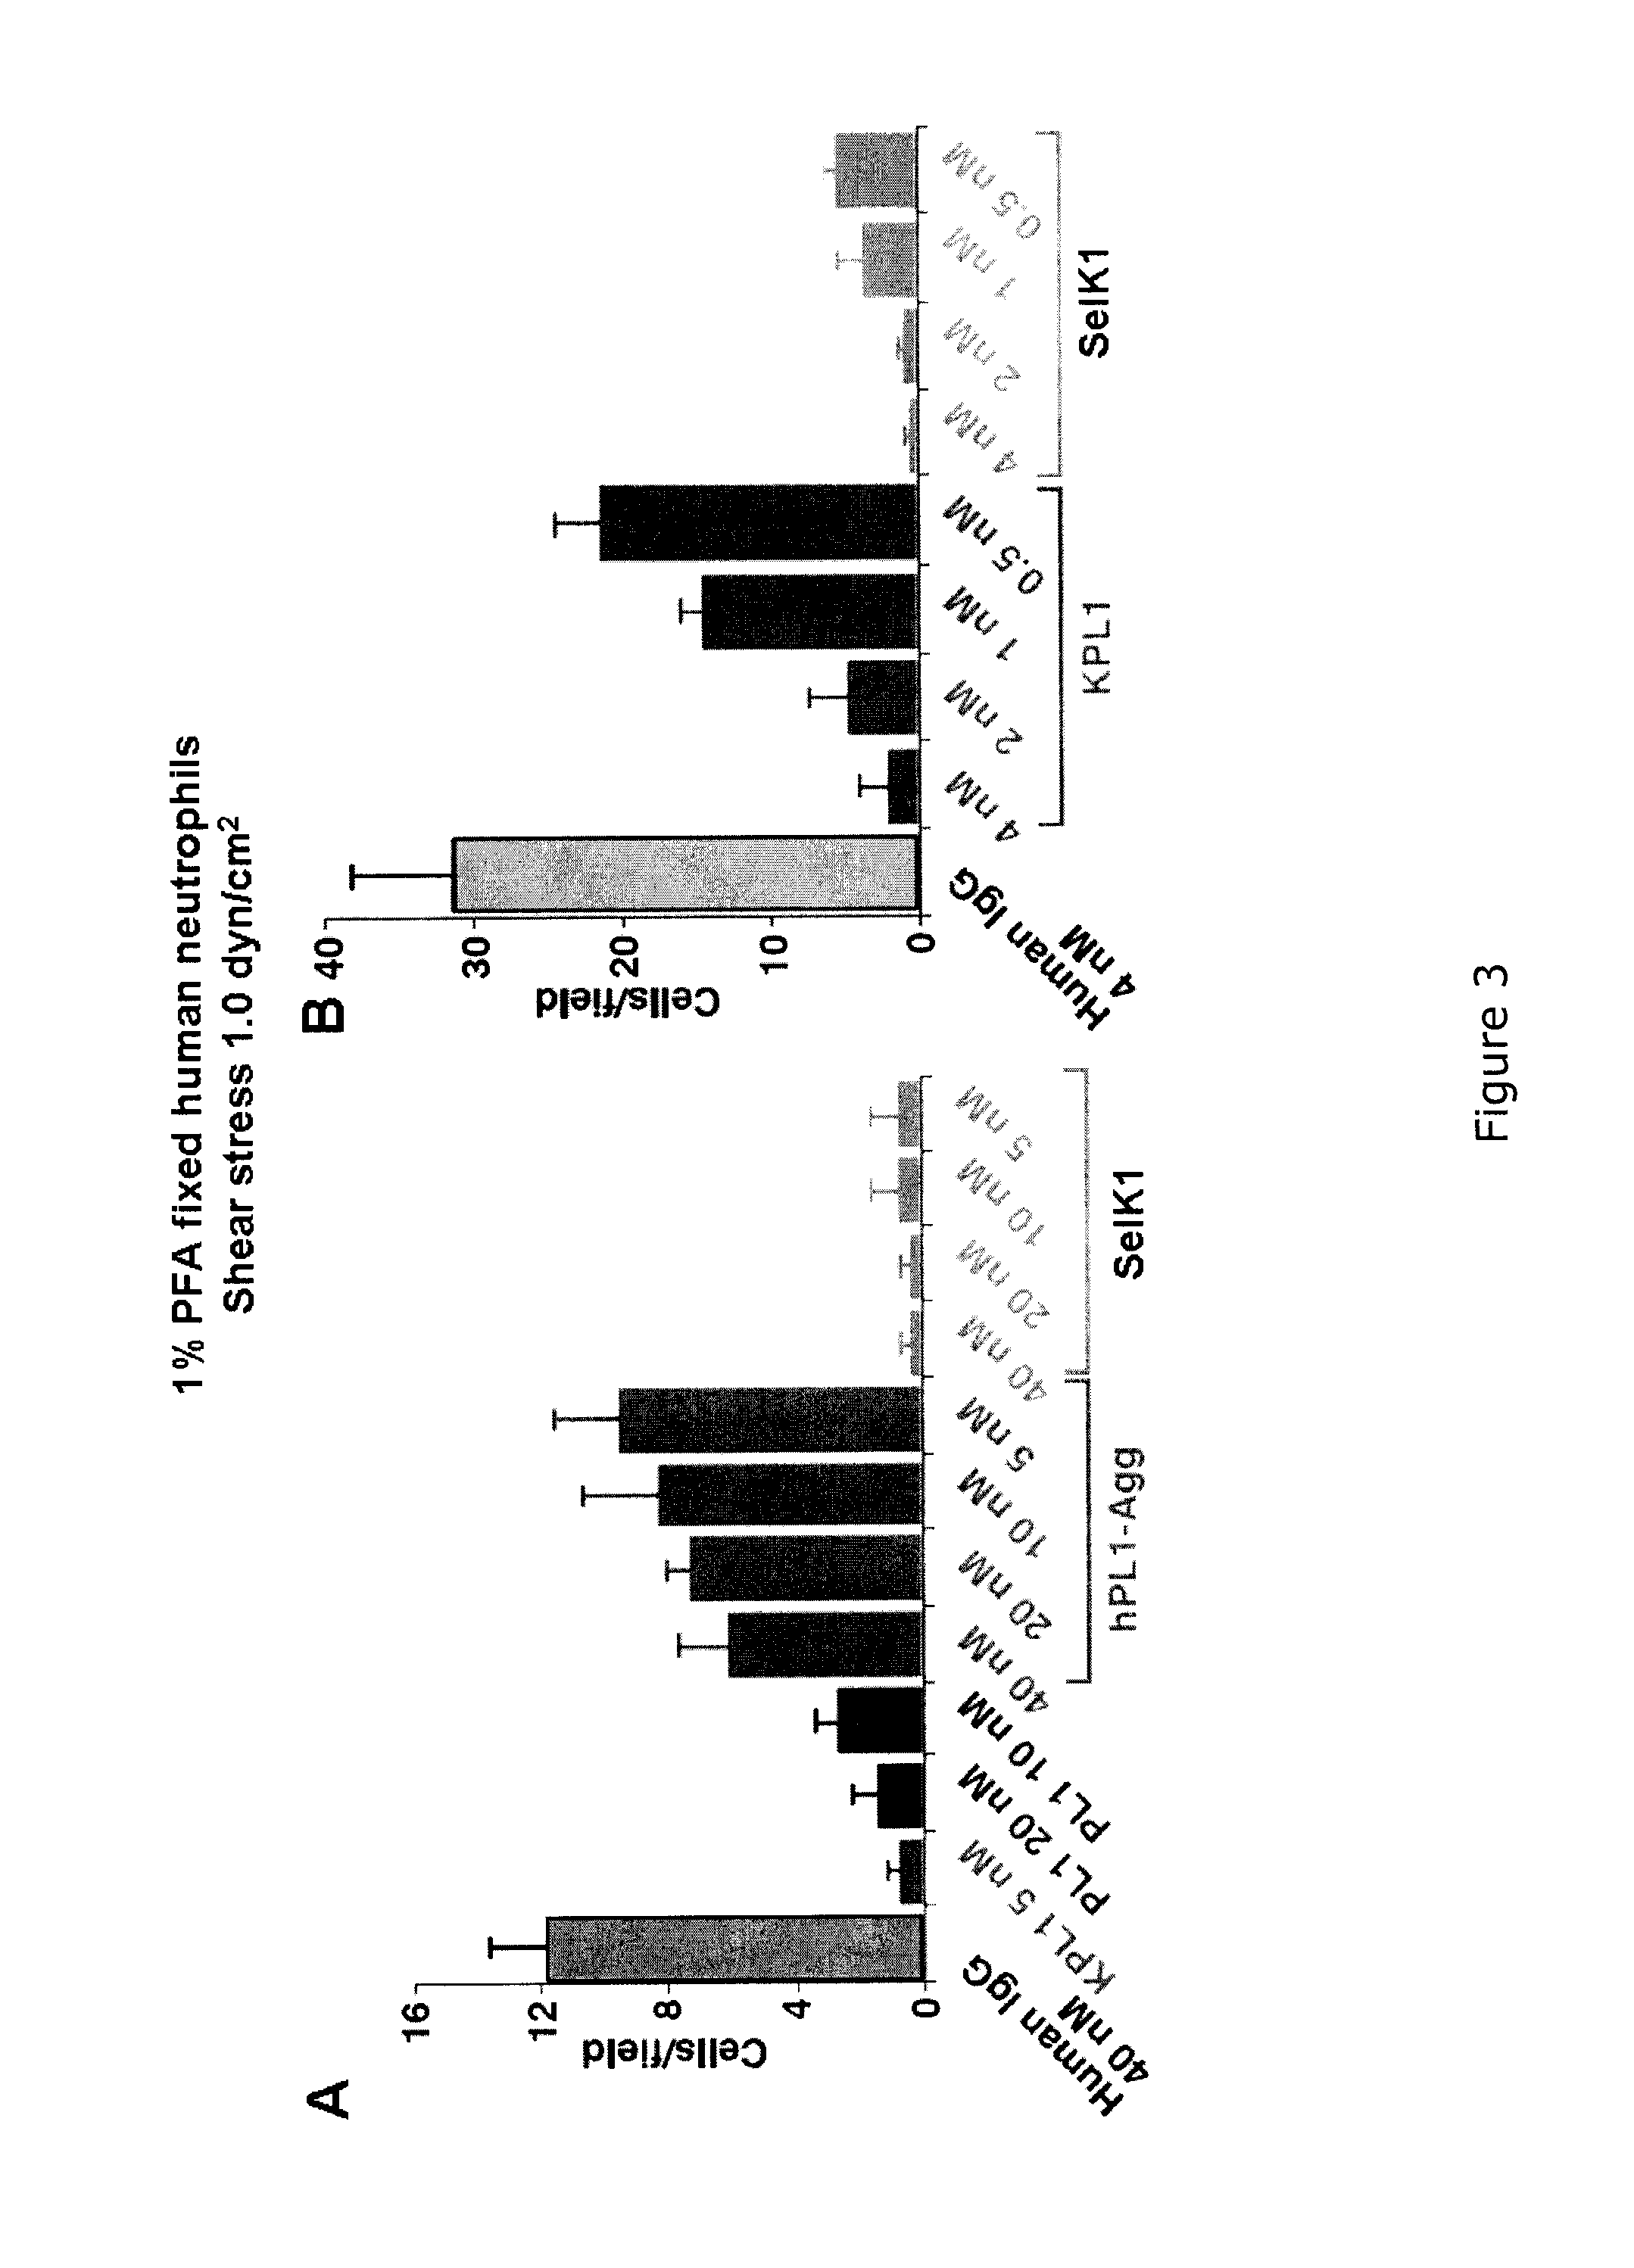 Methods of inhibiting the PSGL-1-mediated adhesion and chemokine-mediated migration with PSGL-1-specific antibodies